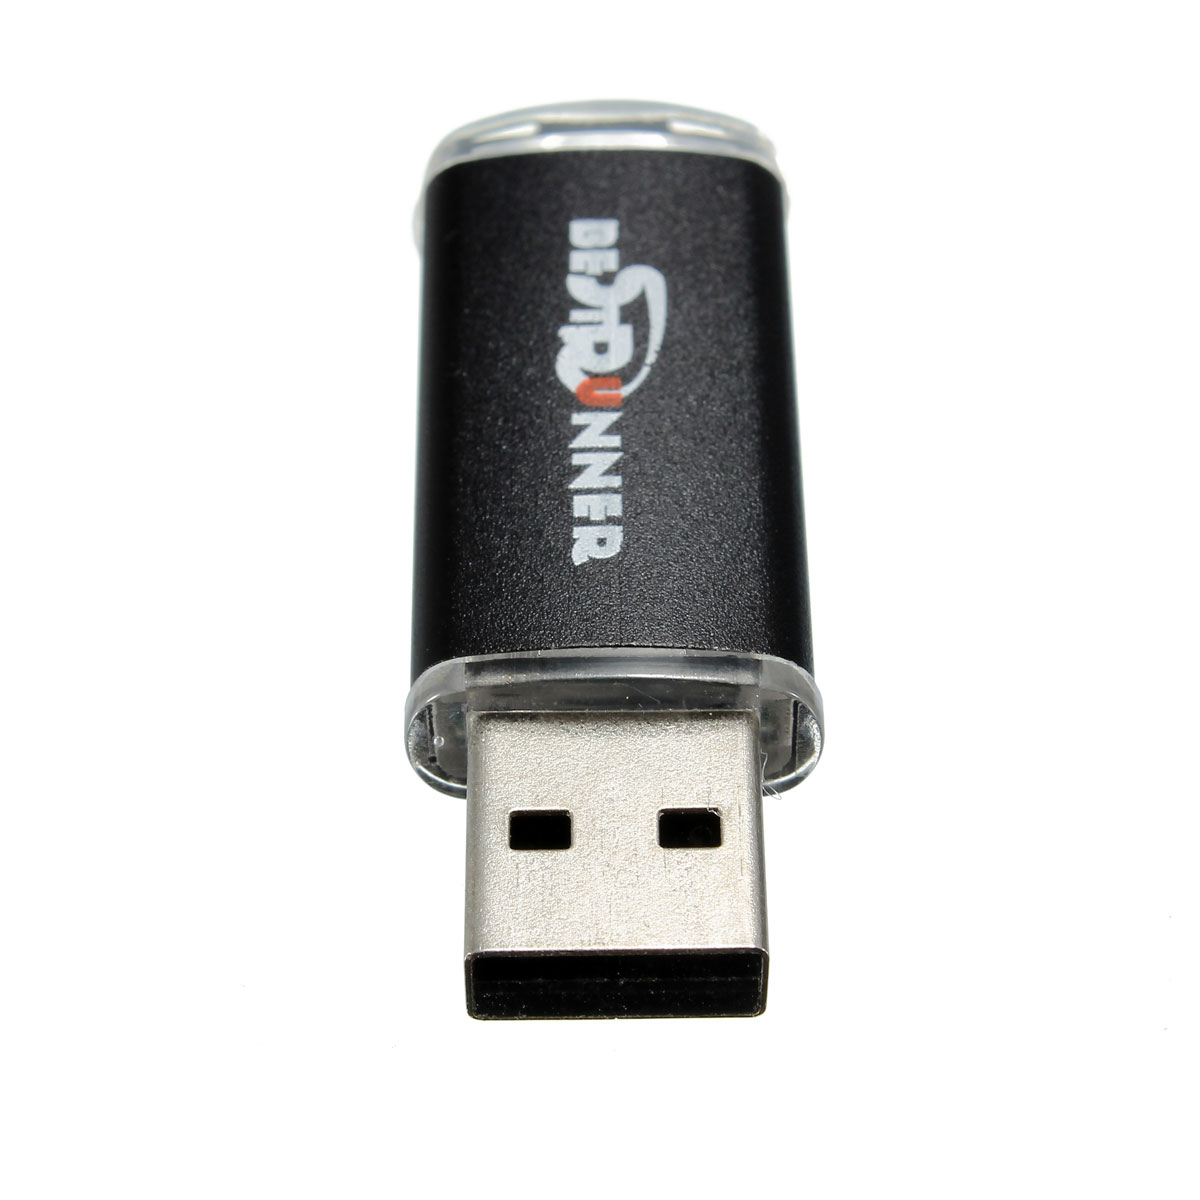 Find Bestrunner Multi Color Portable USB 2 0 1GB/960M Pendrive USB Disk for Macbook Laptop PC for Sale on Gipsybee.com with cryptocurrencies